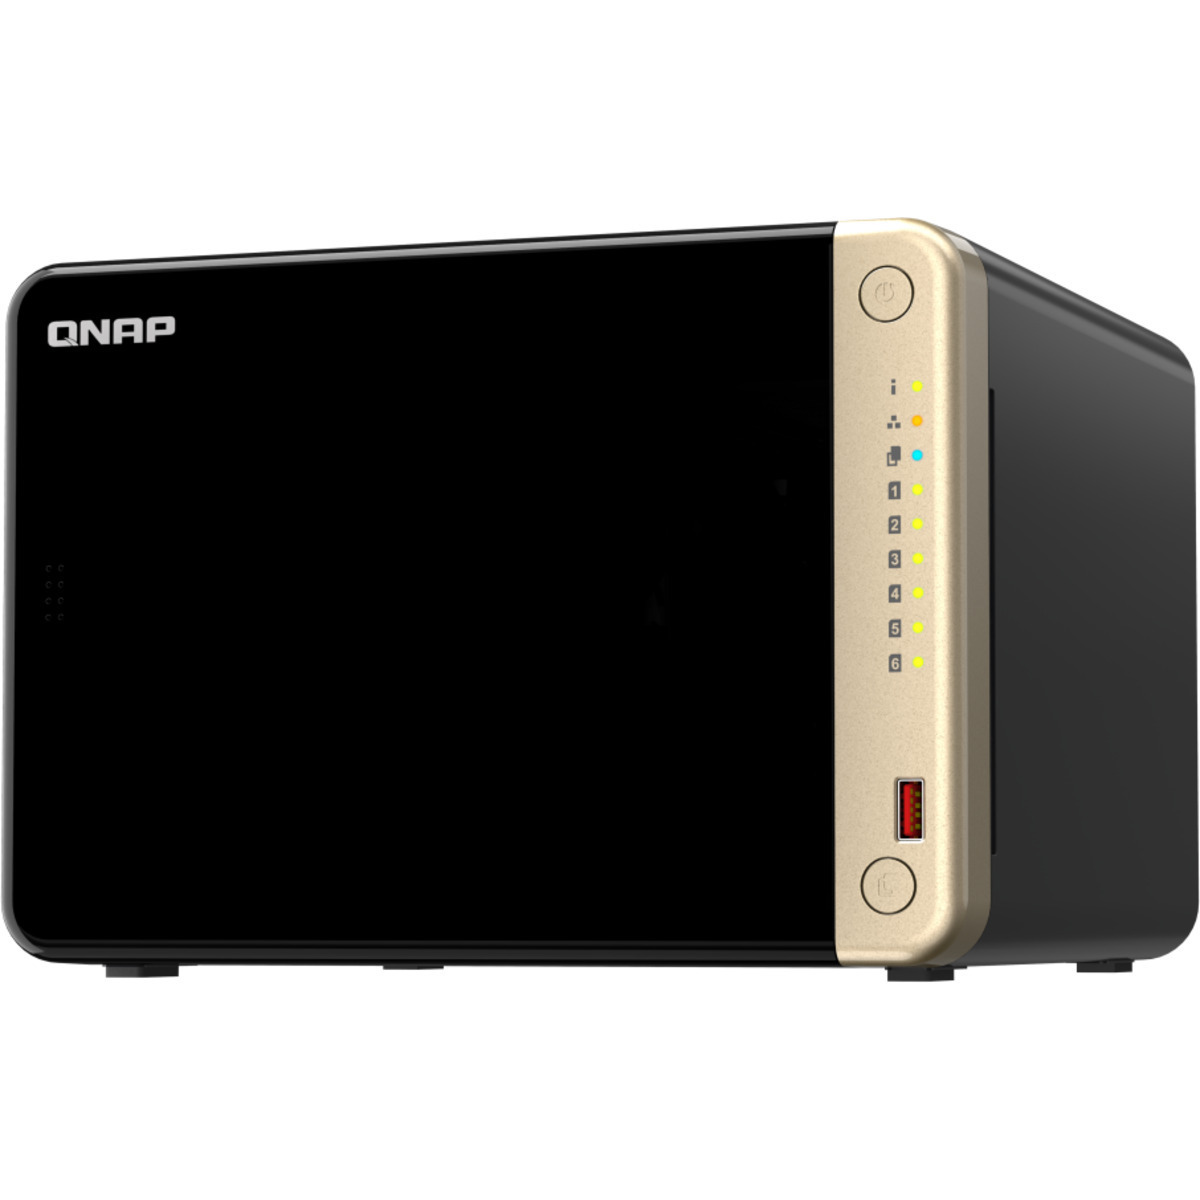 QNAP TS-664 1.5tb 6-Bay Desktop Multimedia / Power User / Business NAS - Network Attached Storage Device 3x500gb Western Digital Red SA500 WDS500G1R0A 2.5 560/530MB/s SATA 6Gb/s SSD NAS Class Drives Installed - Burn-In Tested TS-664